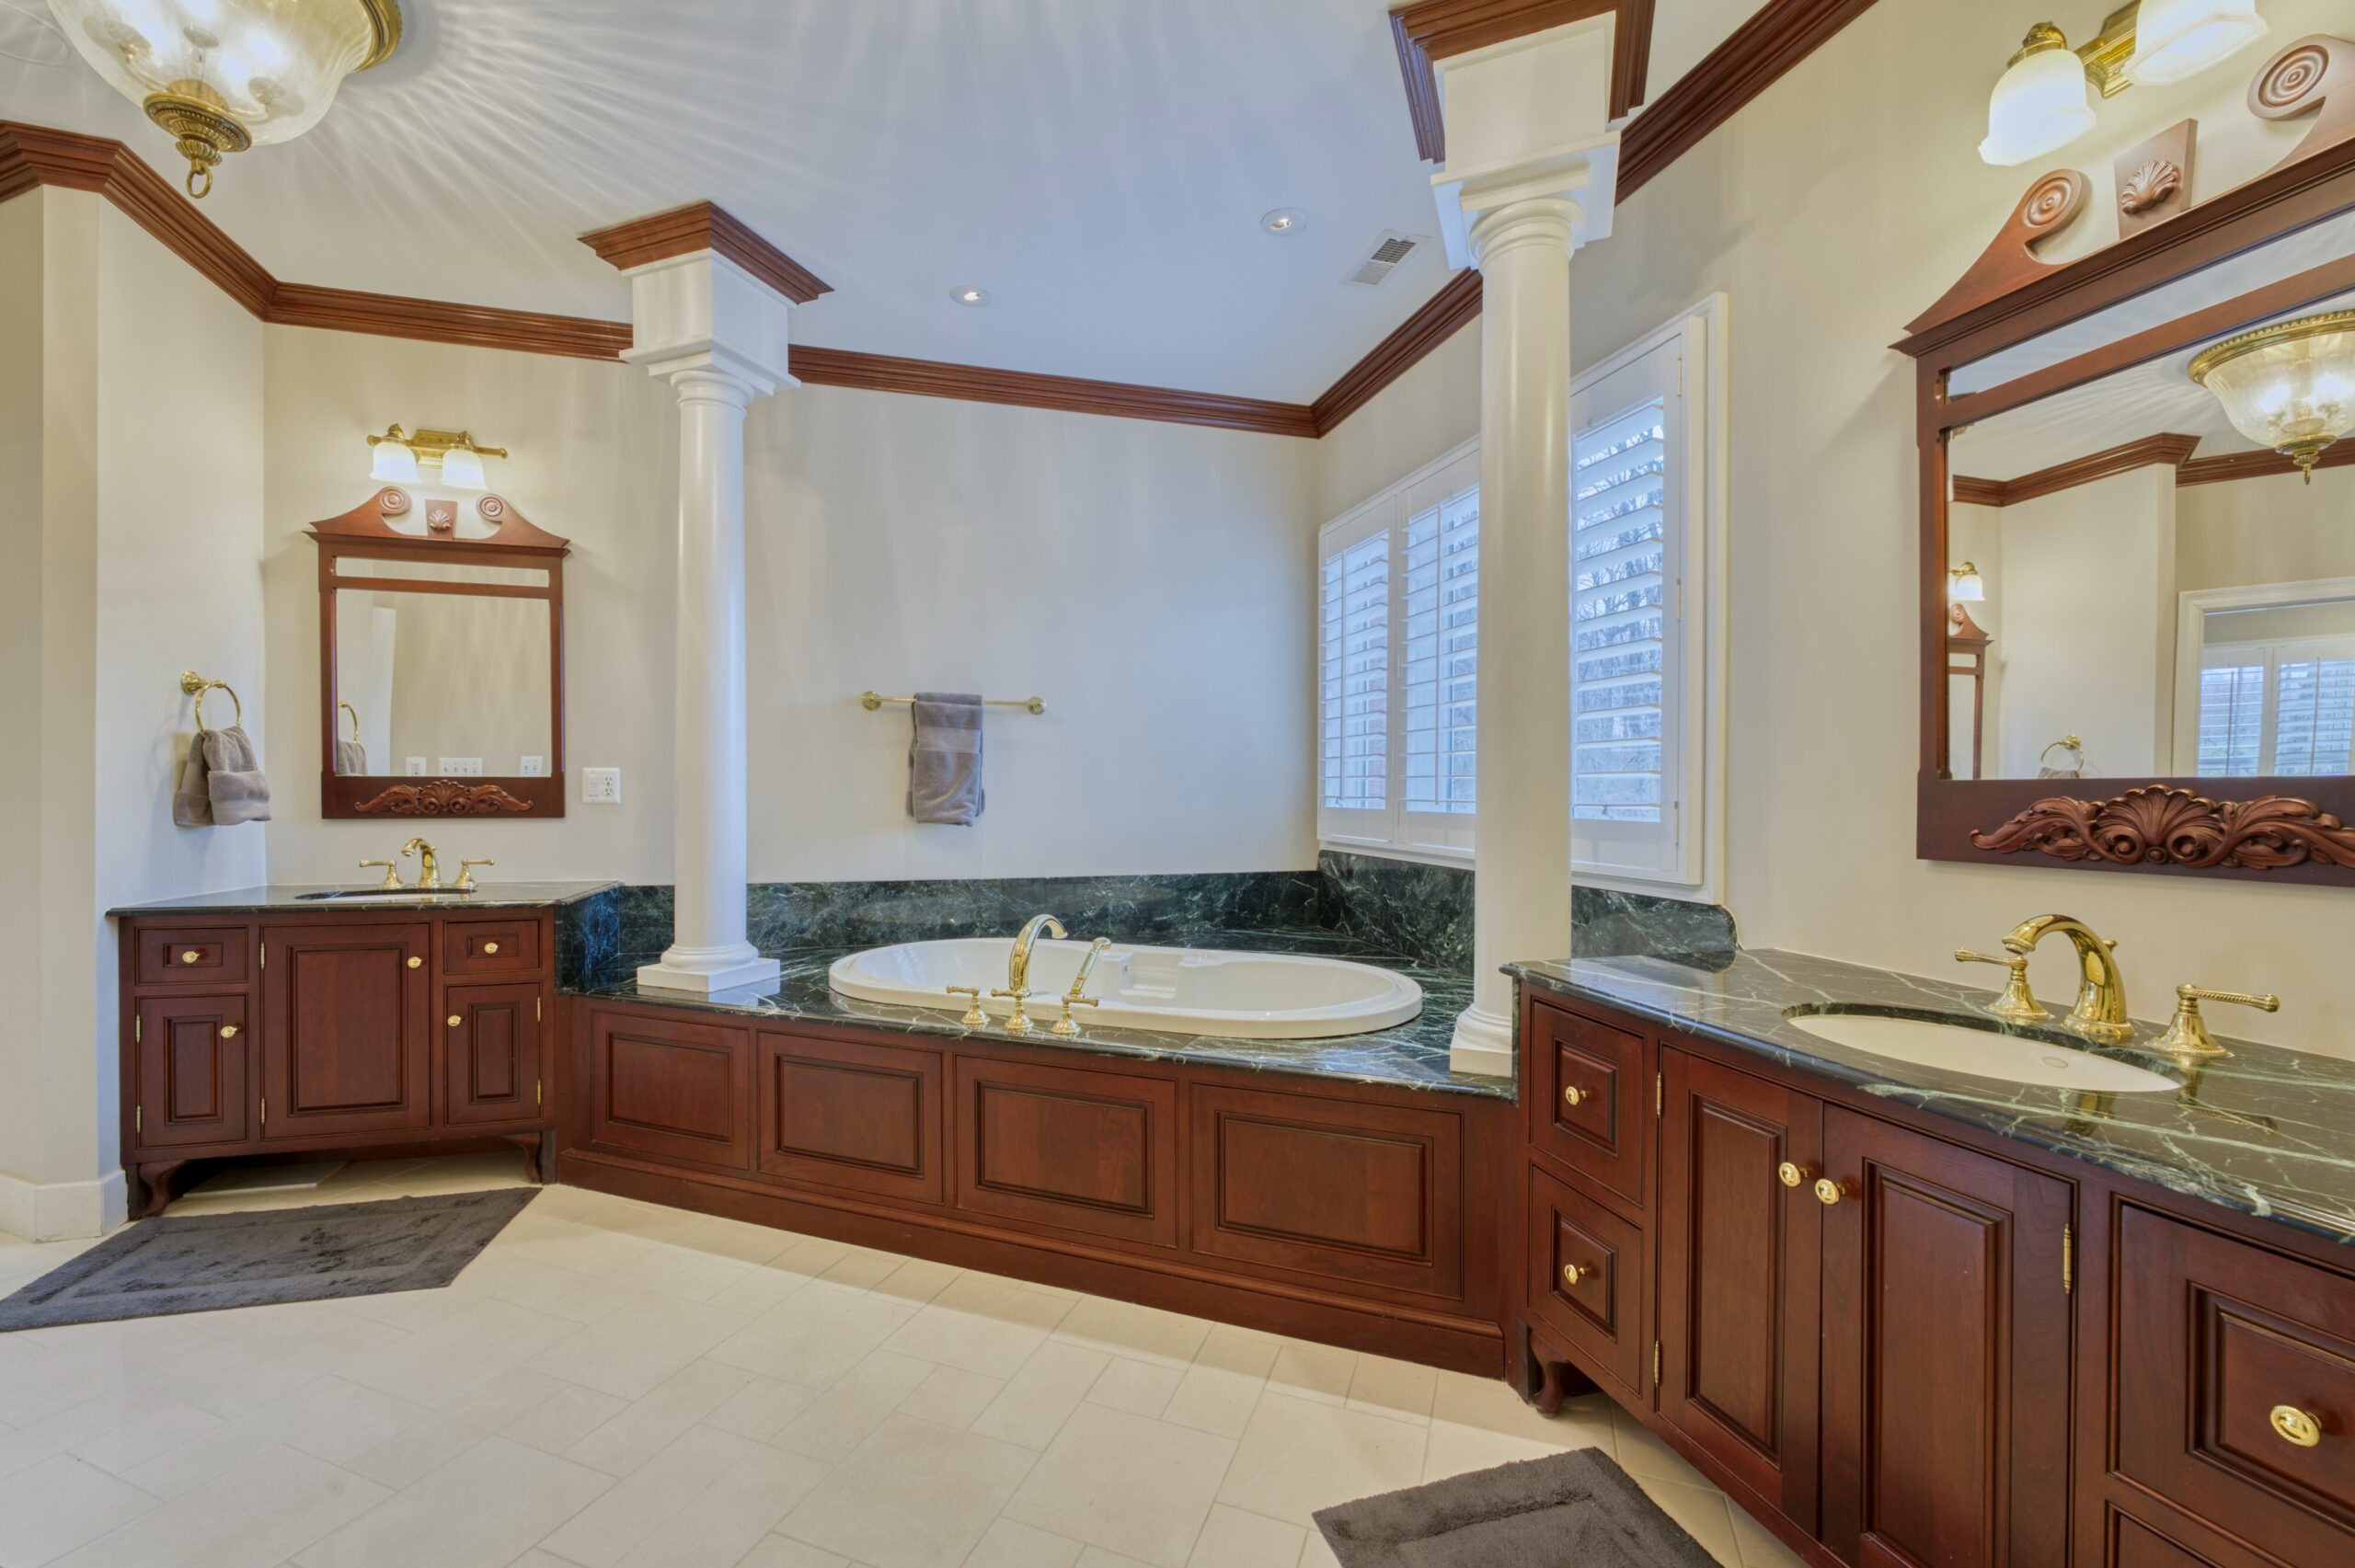 Interior professional photo of 40573 Spectacular Bid Place - showing one of the primary bathrooms with deep soaking tub flanked by 2 columns and separate vanities